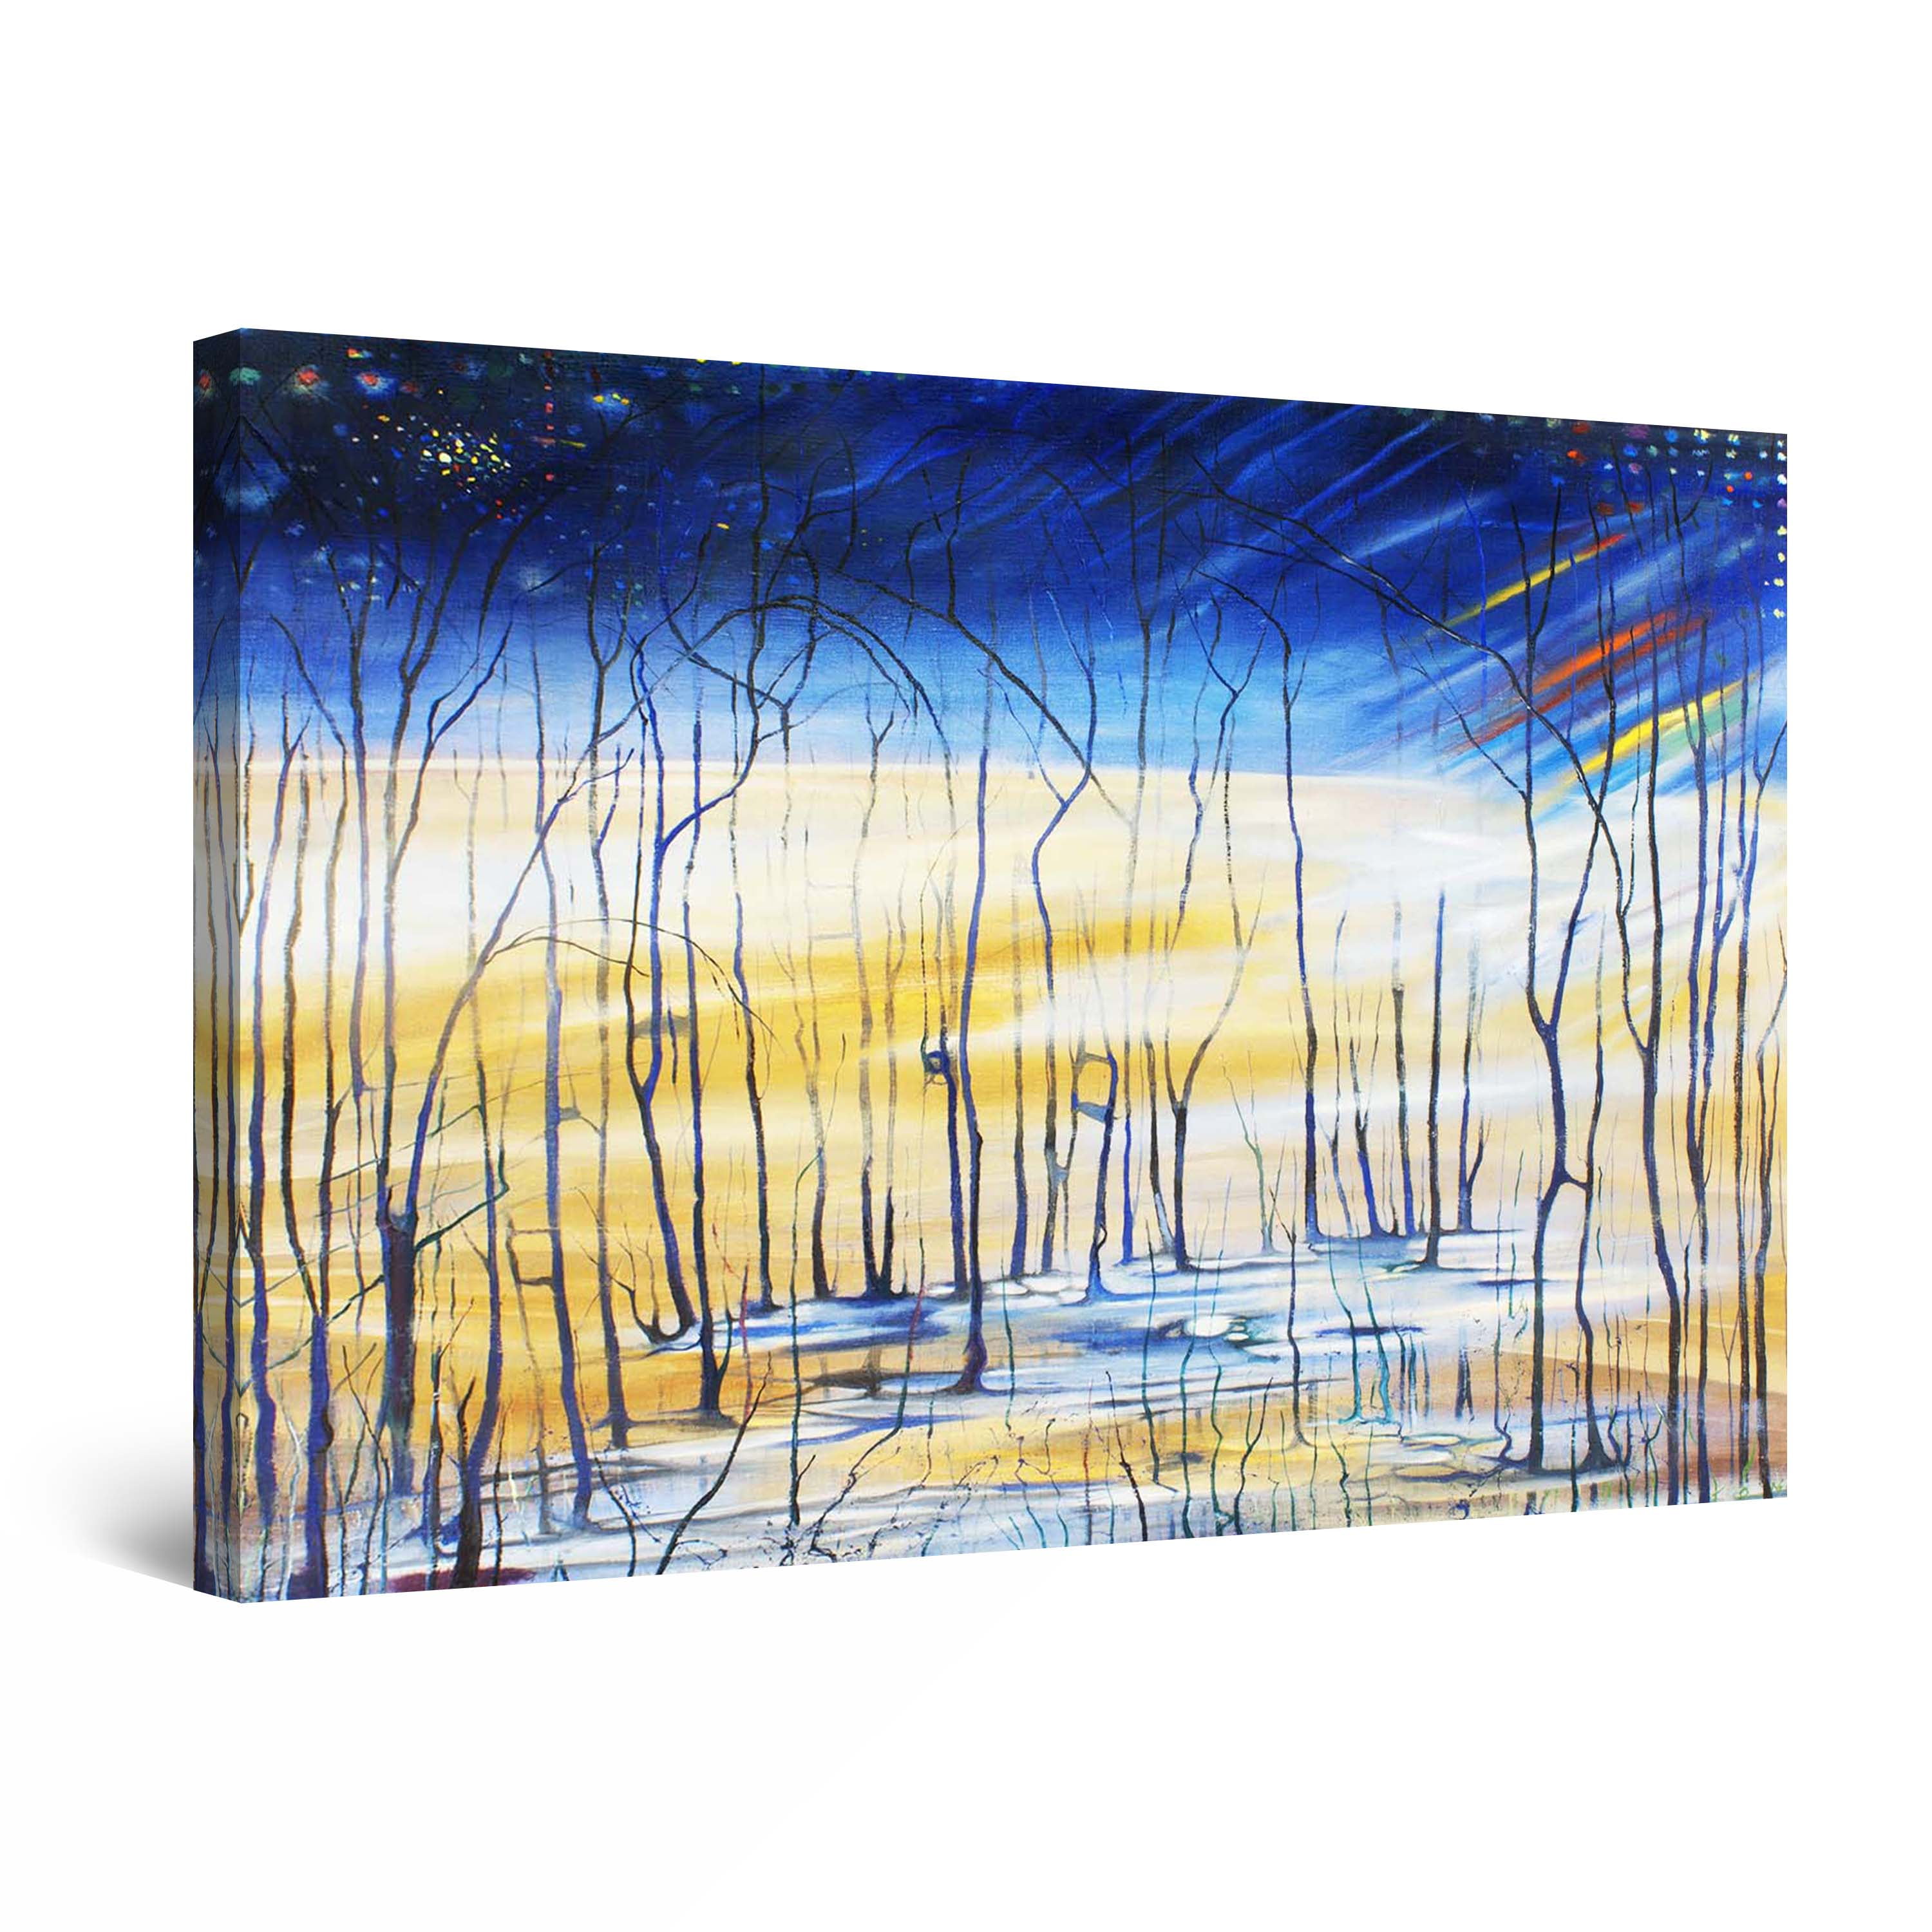 Startonight Canvas Wall Art Surreal Blue Navy Sky and Landscape Large ...